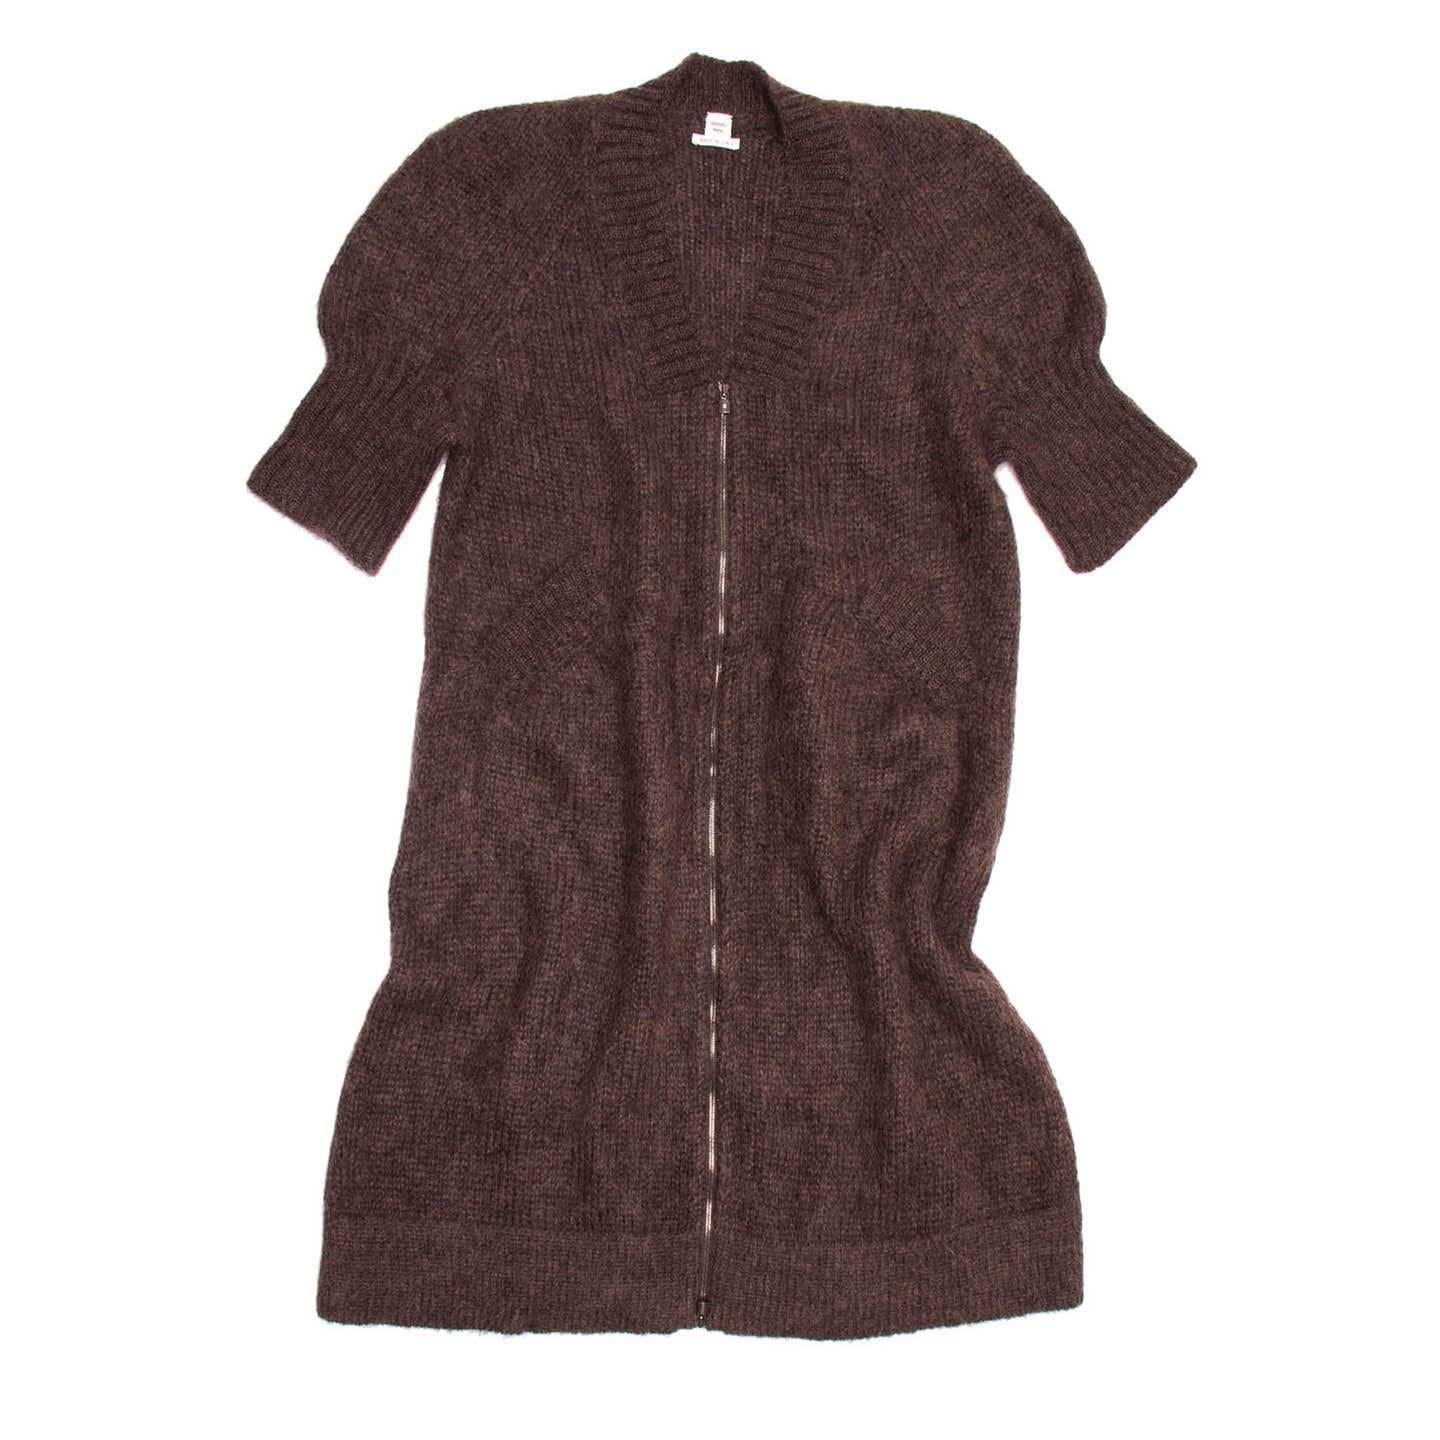 Chocolate brown warm angora knit long top/dress with short cuffed sleeves. The close V-neck is ribbed and elegant to match the little slash pockets at waist and the cuffs. An open-ended visible charcoal grey metallic zipper fastens the front.

Size 